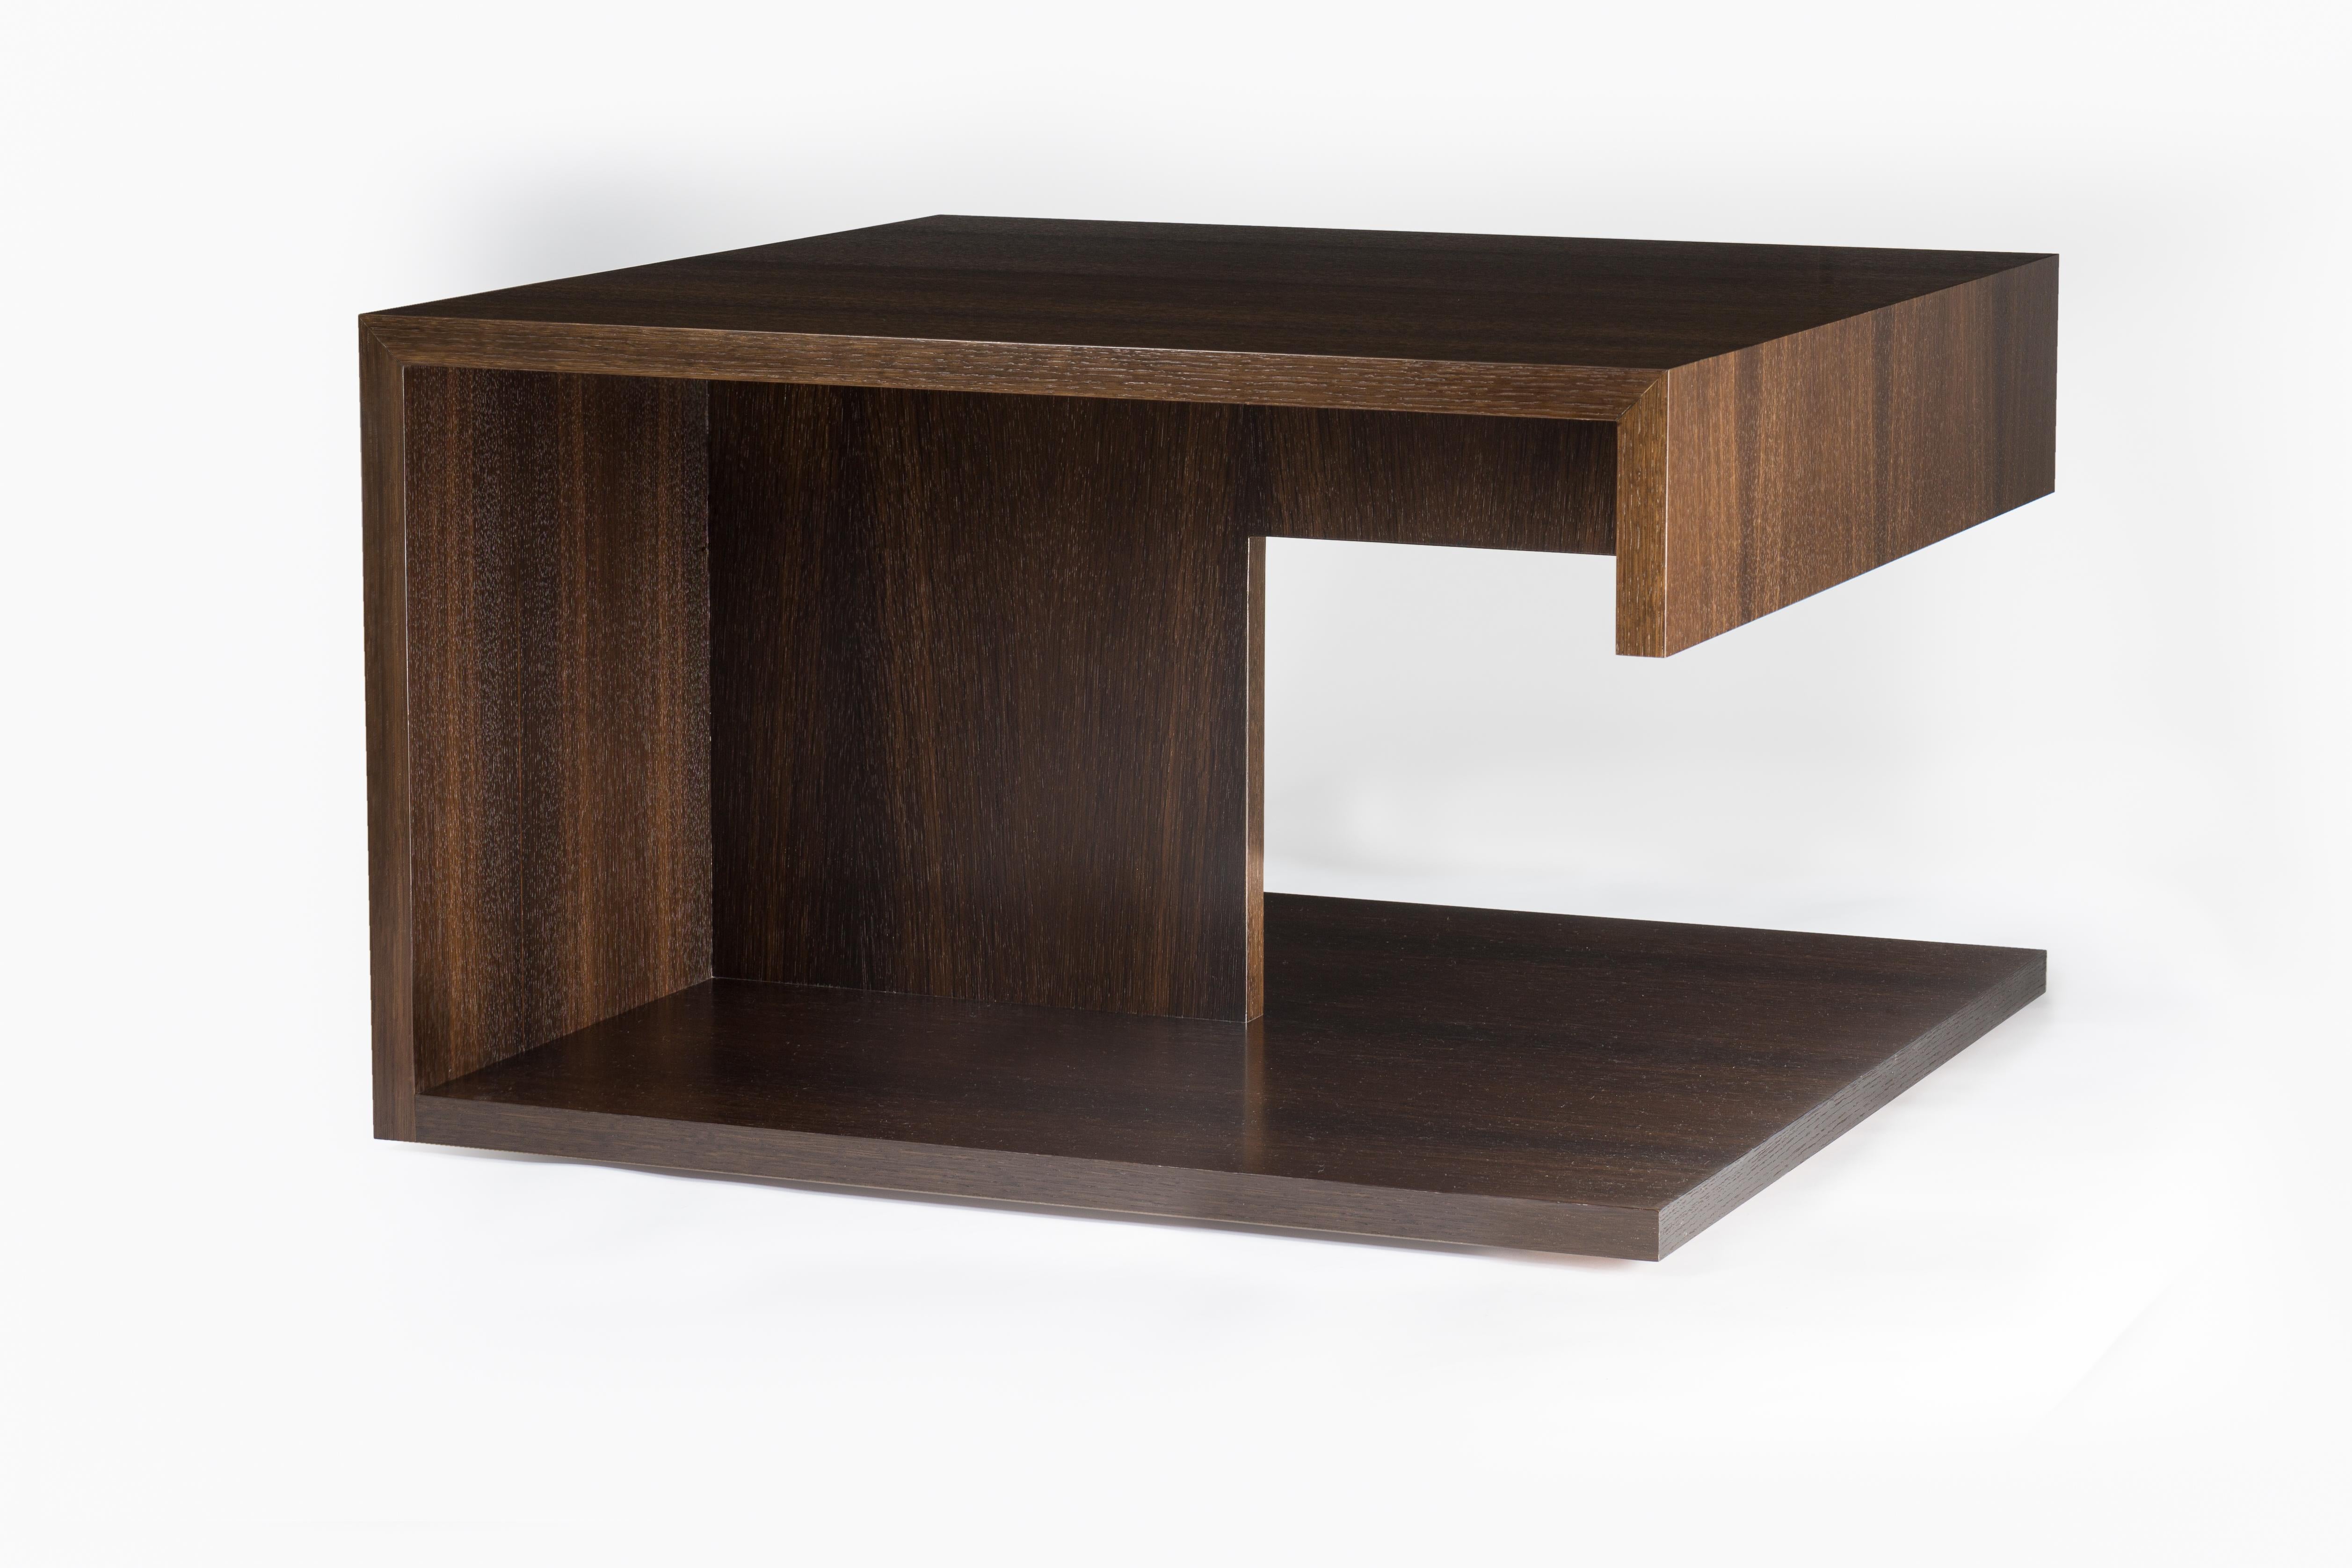 This version of our modern wood end table is called the 